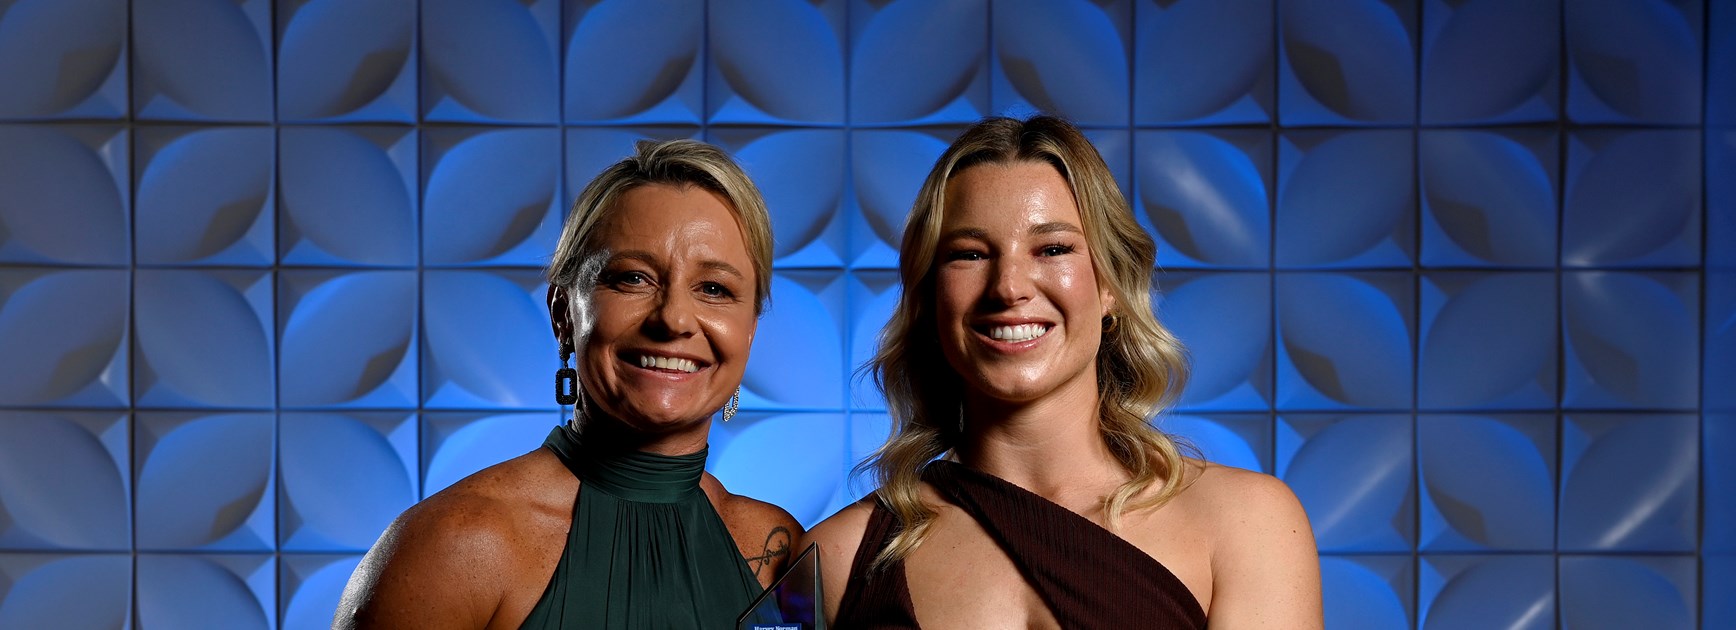 Tonegato named NSW Women’s Origin Player of the Year